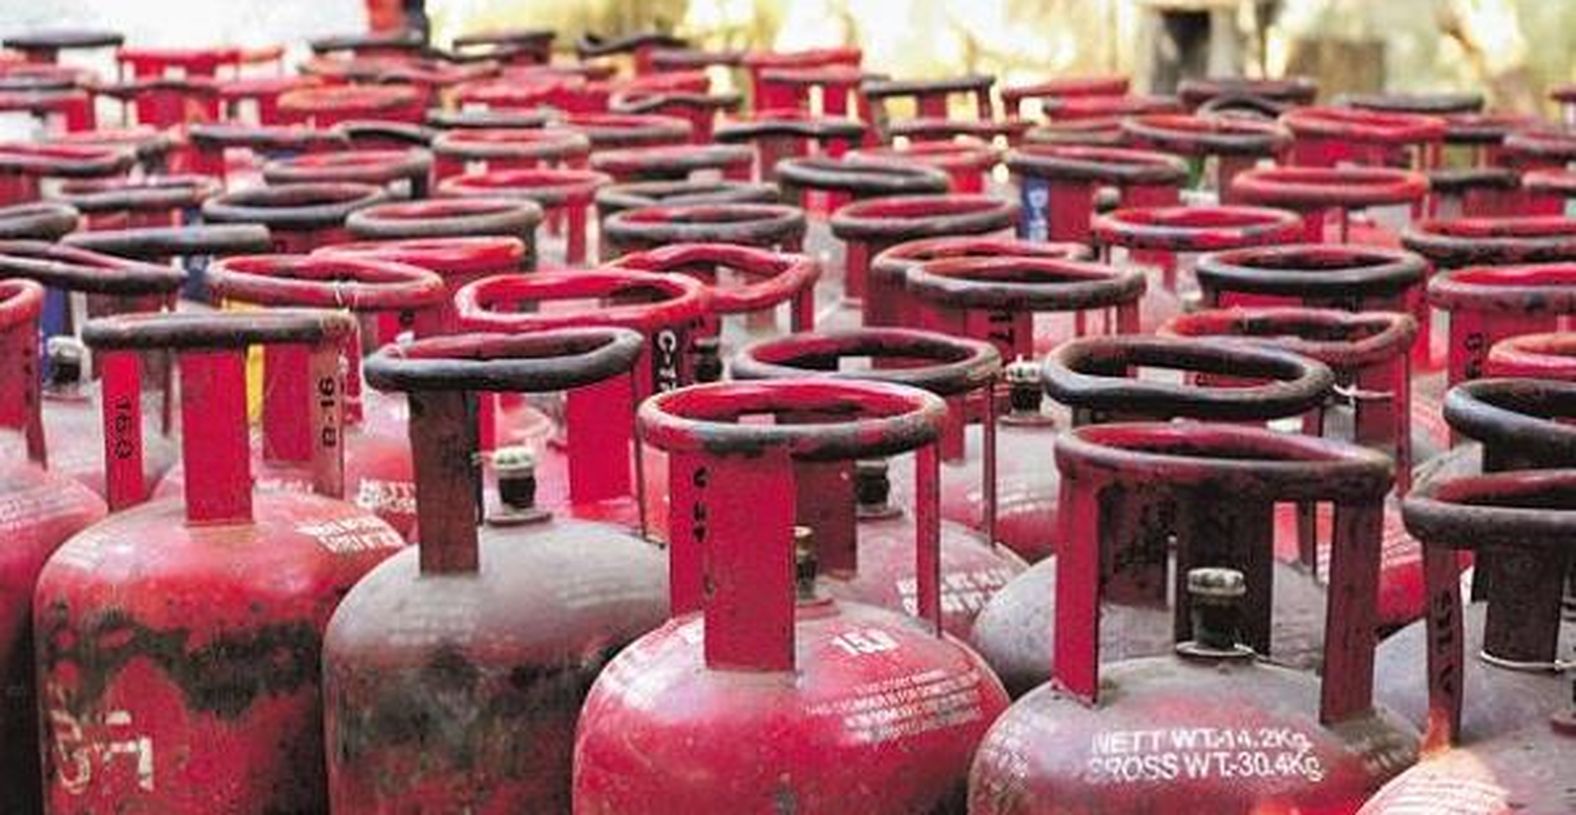  145 rupees on domestic gas cylinders for the first time